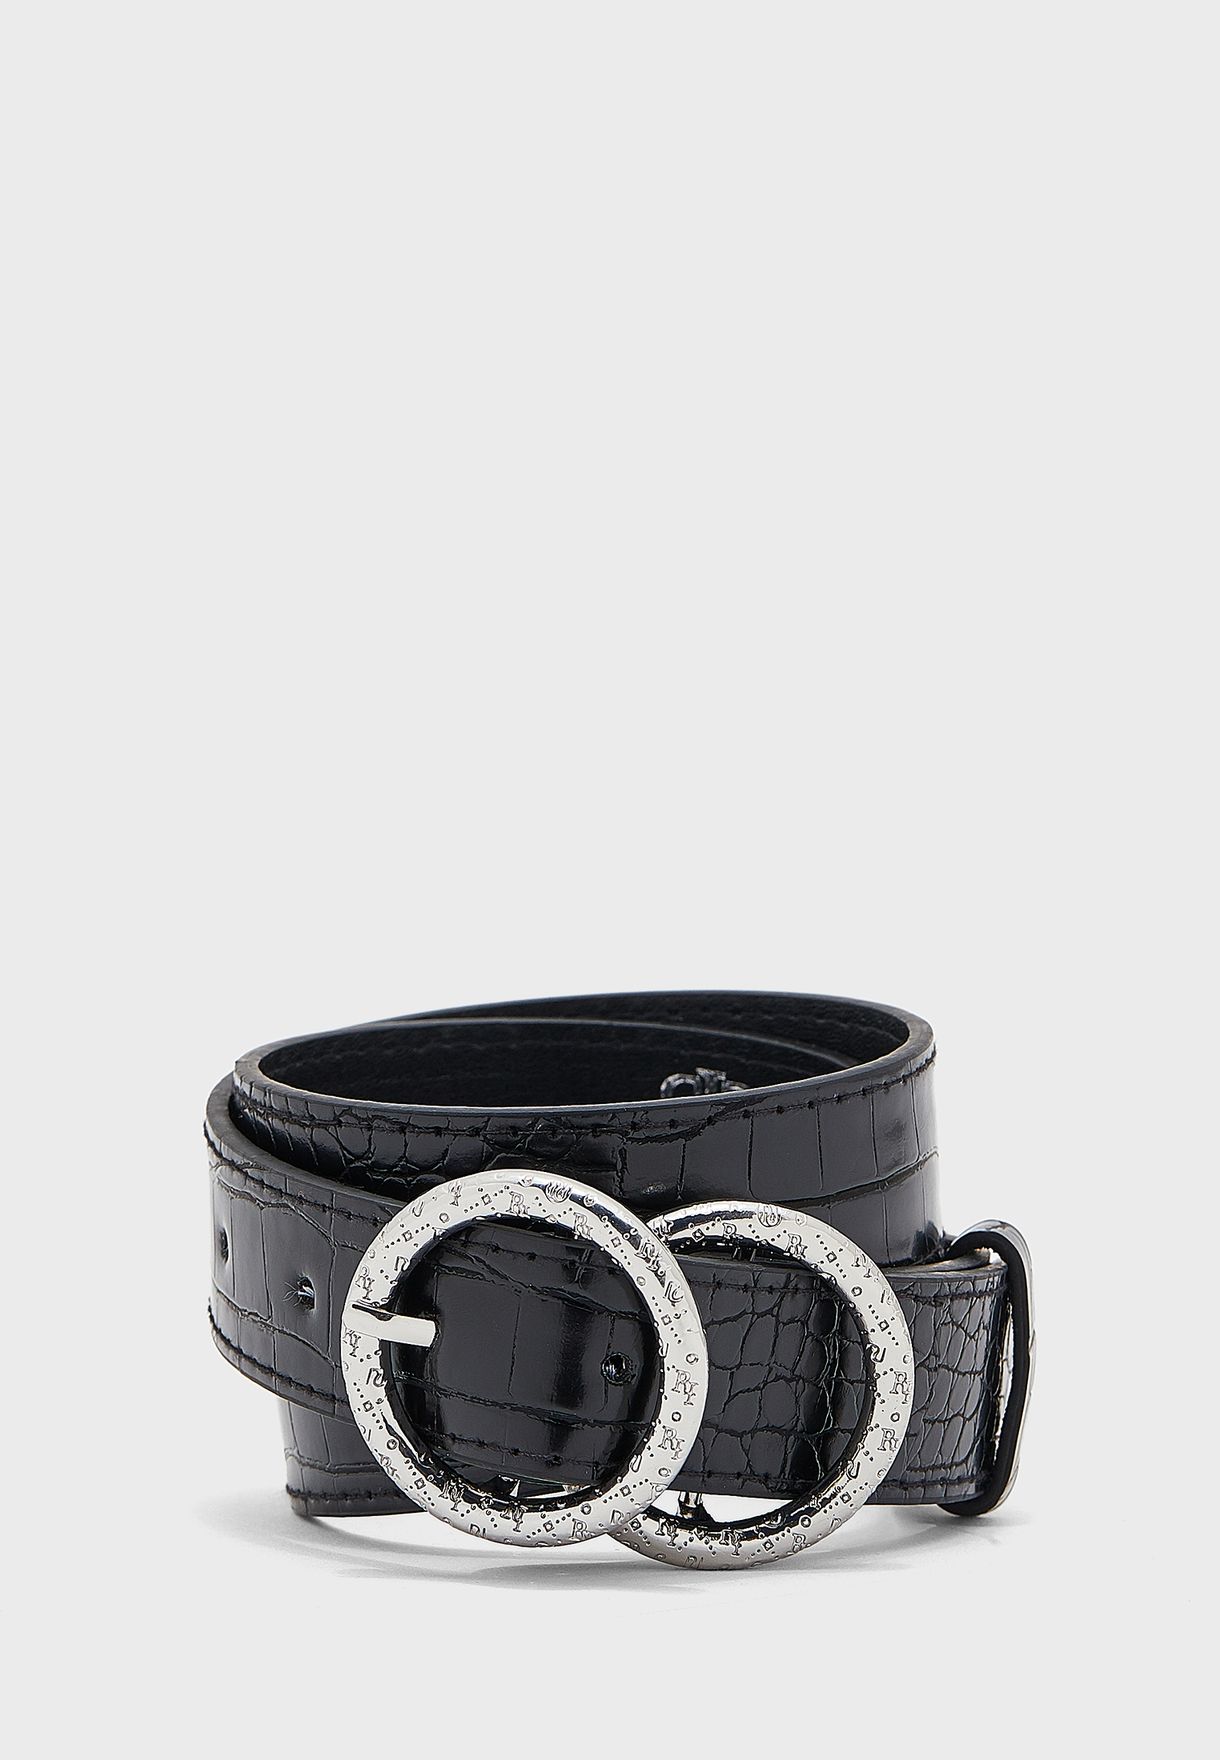 Allocated Hole Belt